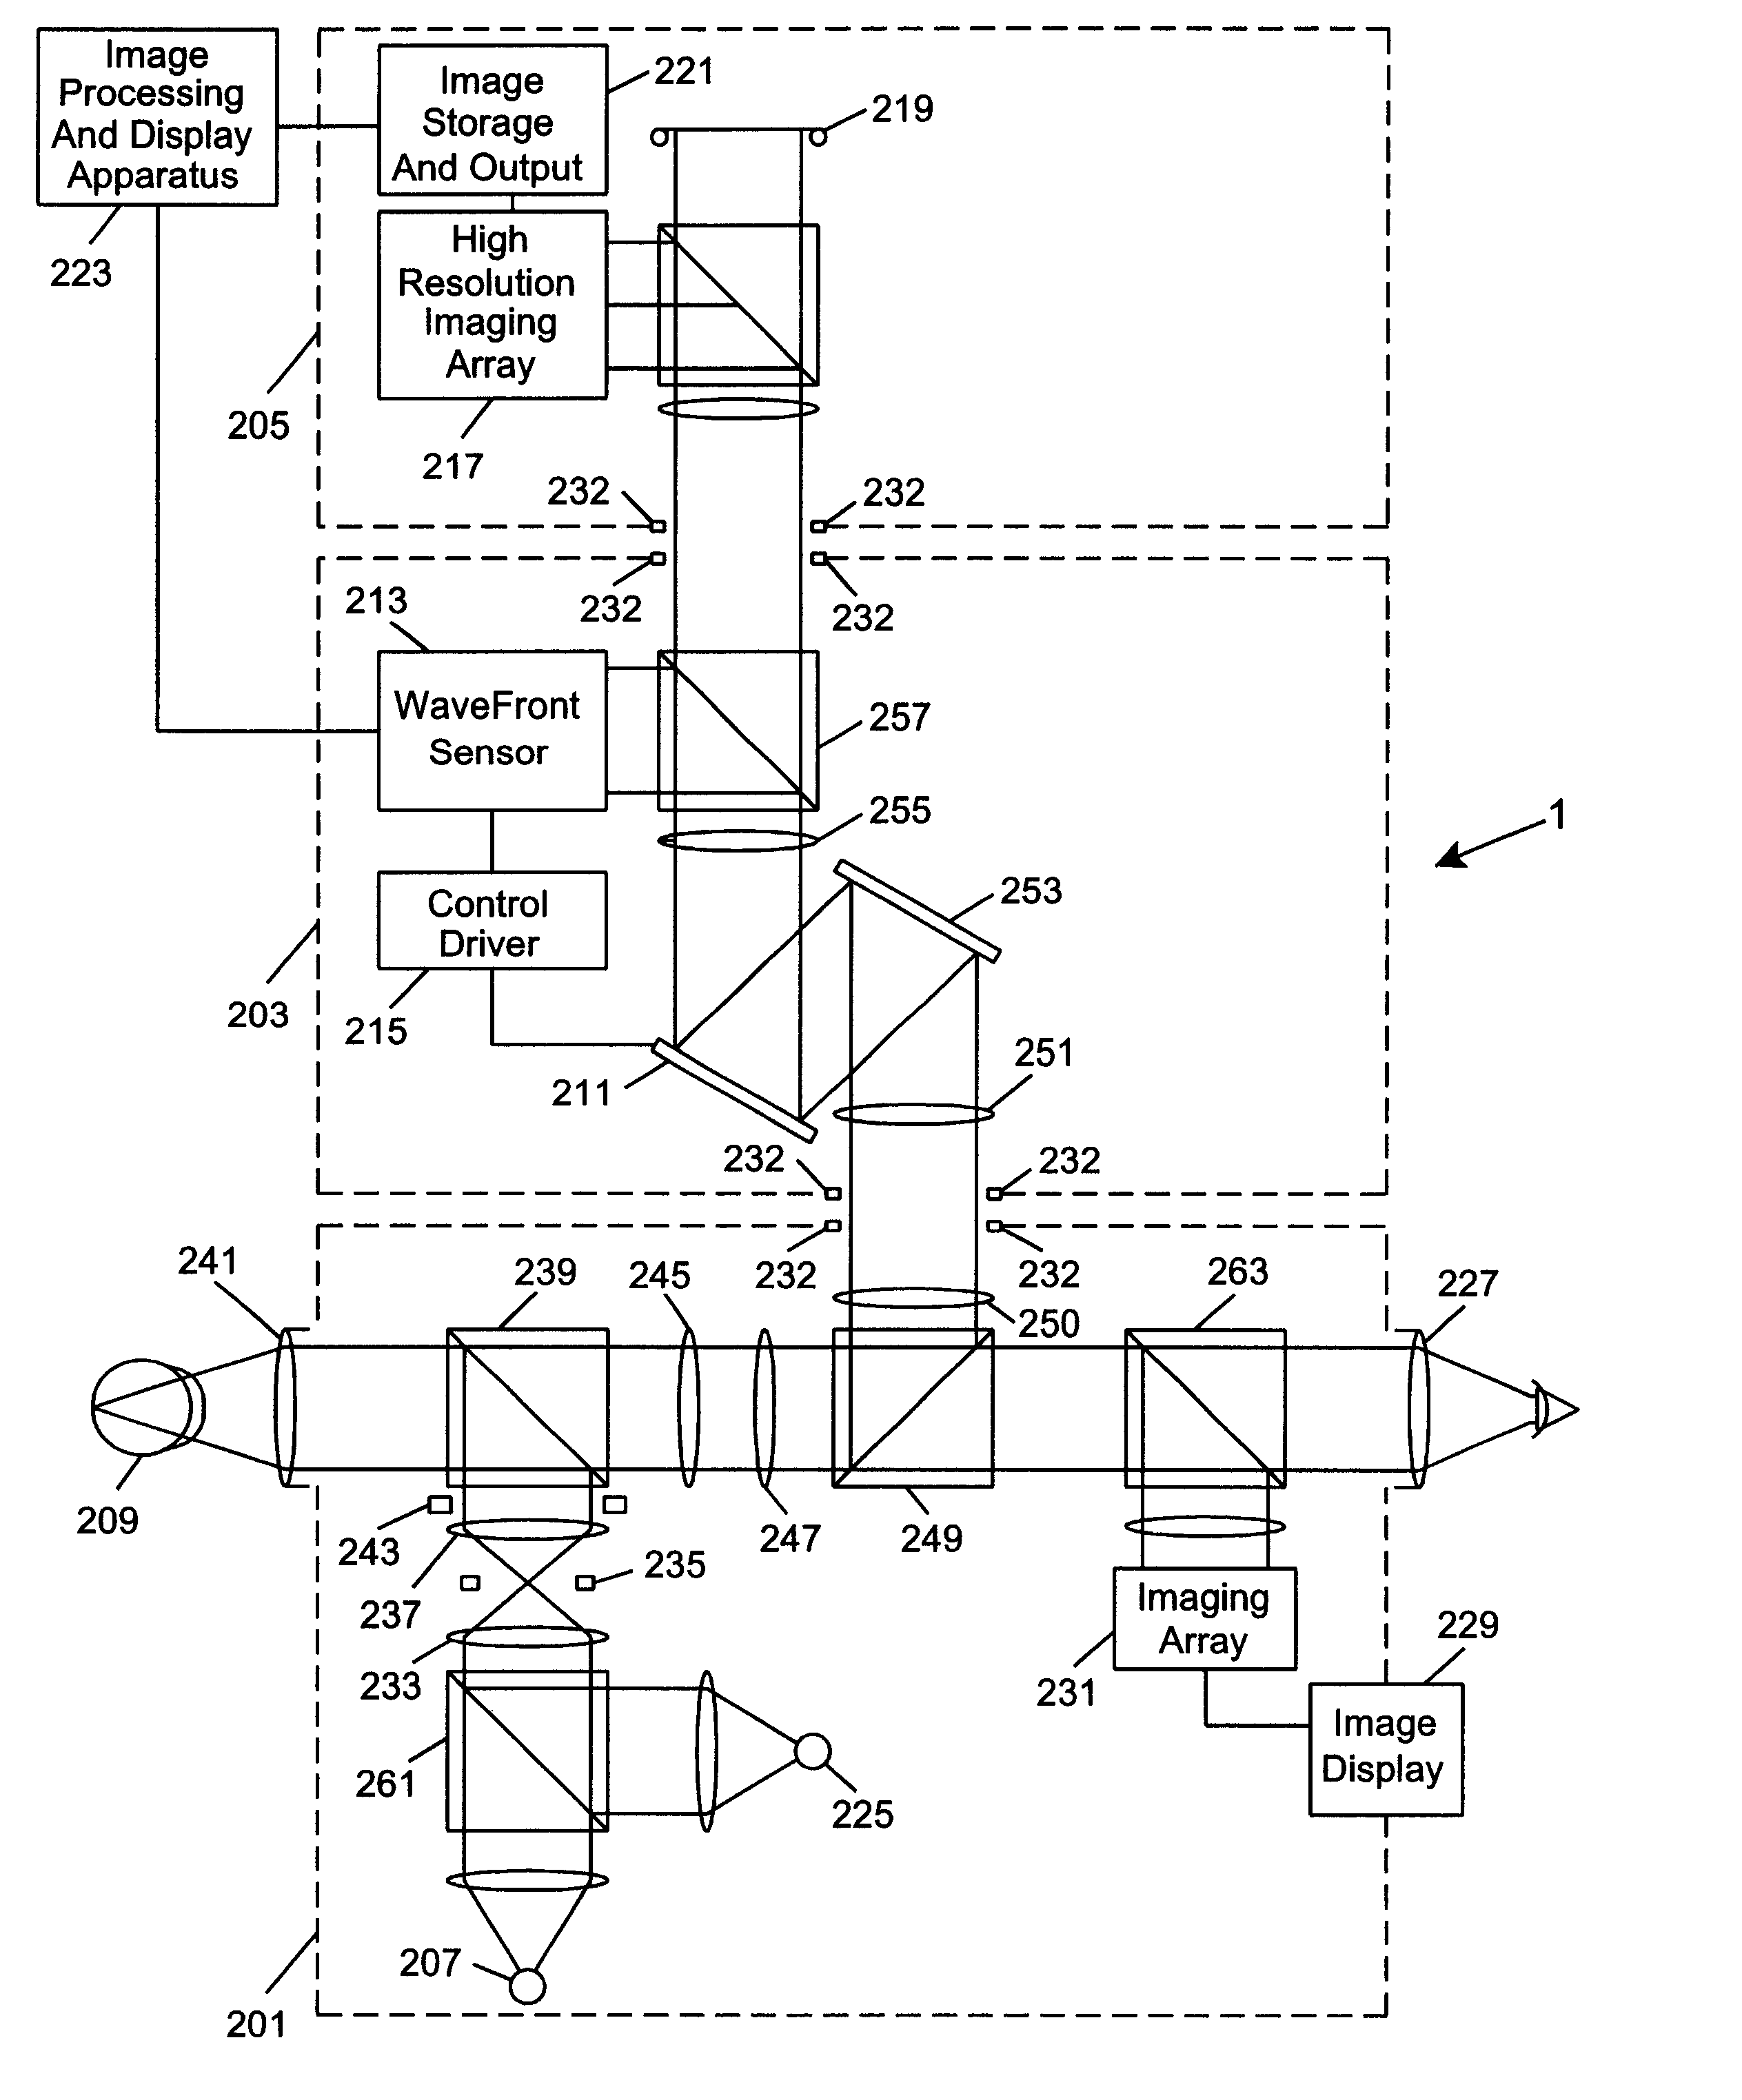 Ophthalmic instrument having an integral wavefront sensor and display device that displays a graphical representation of high order aberrations of the human eye measured by the wavefront sensor